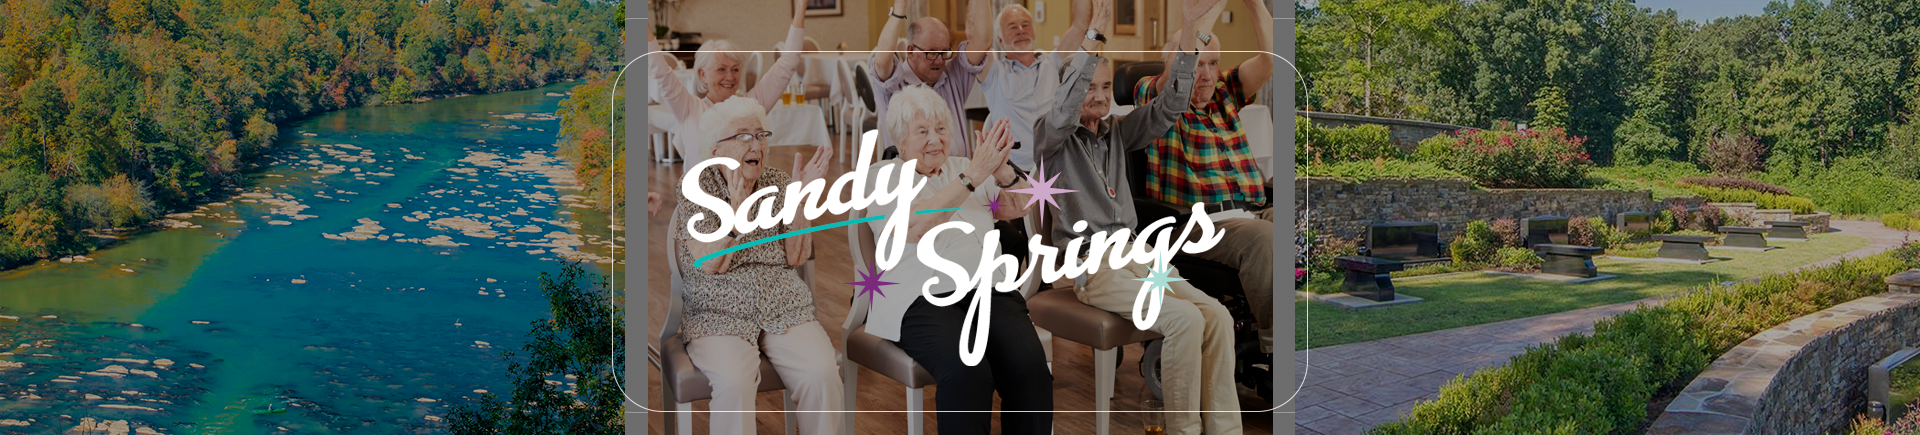 Respite Care for the Elderly with Dementia in Sandy Springs, GA